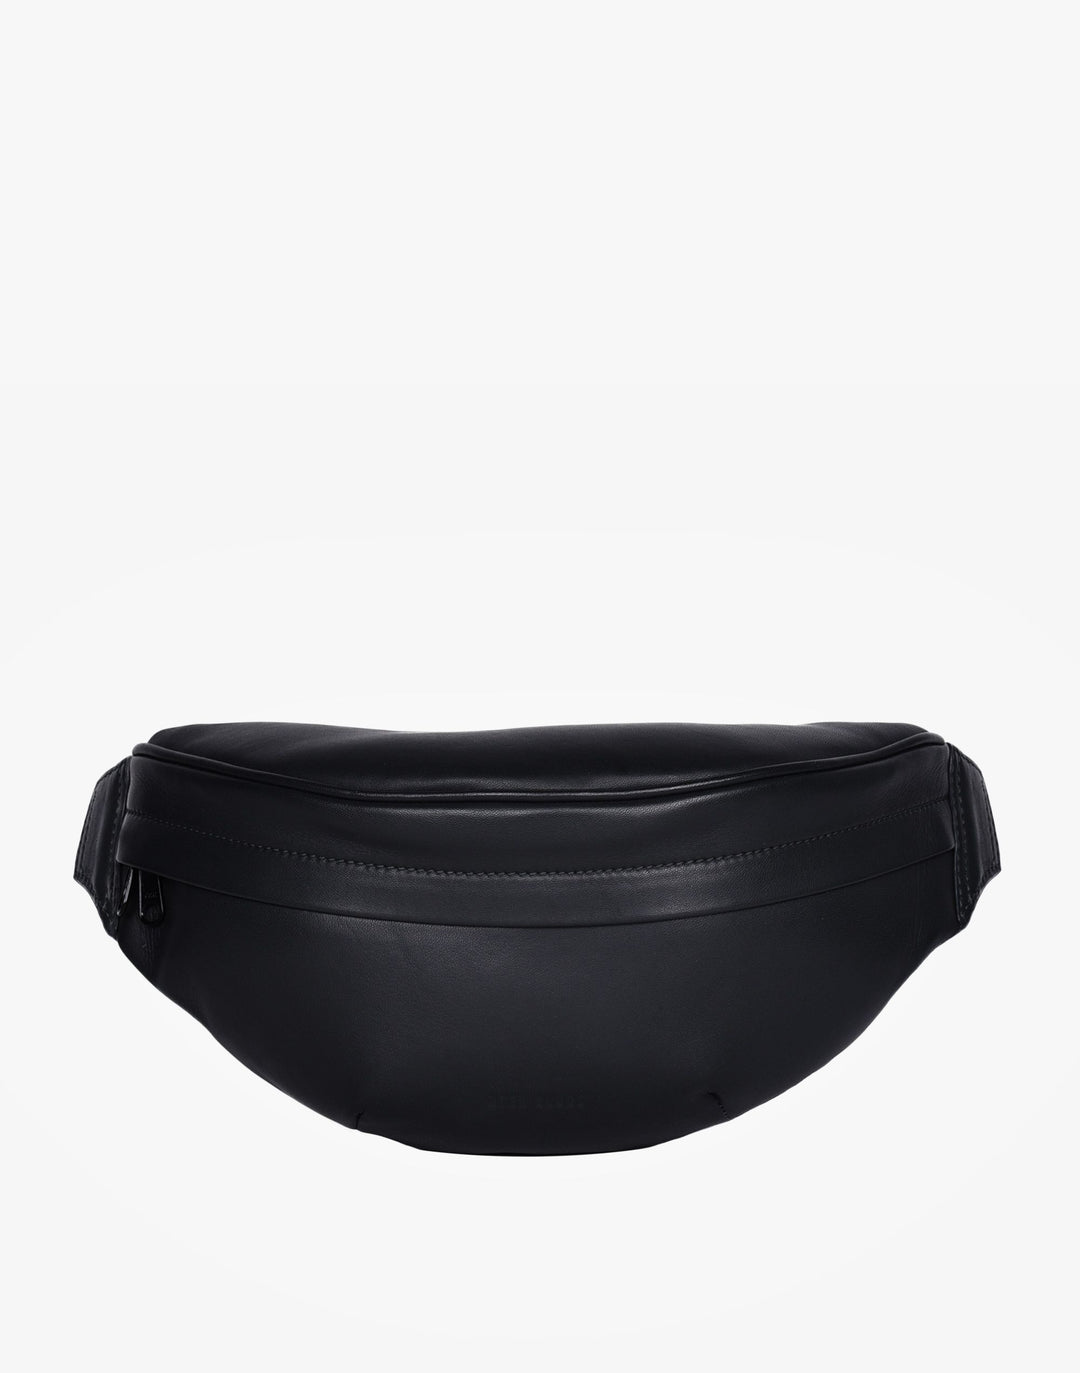 Black Fanny Pack Extender Strap up to 25 Inches Works Only With SUY Gifts  Small Fanny Packs 